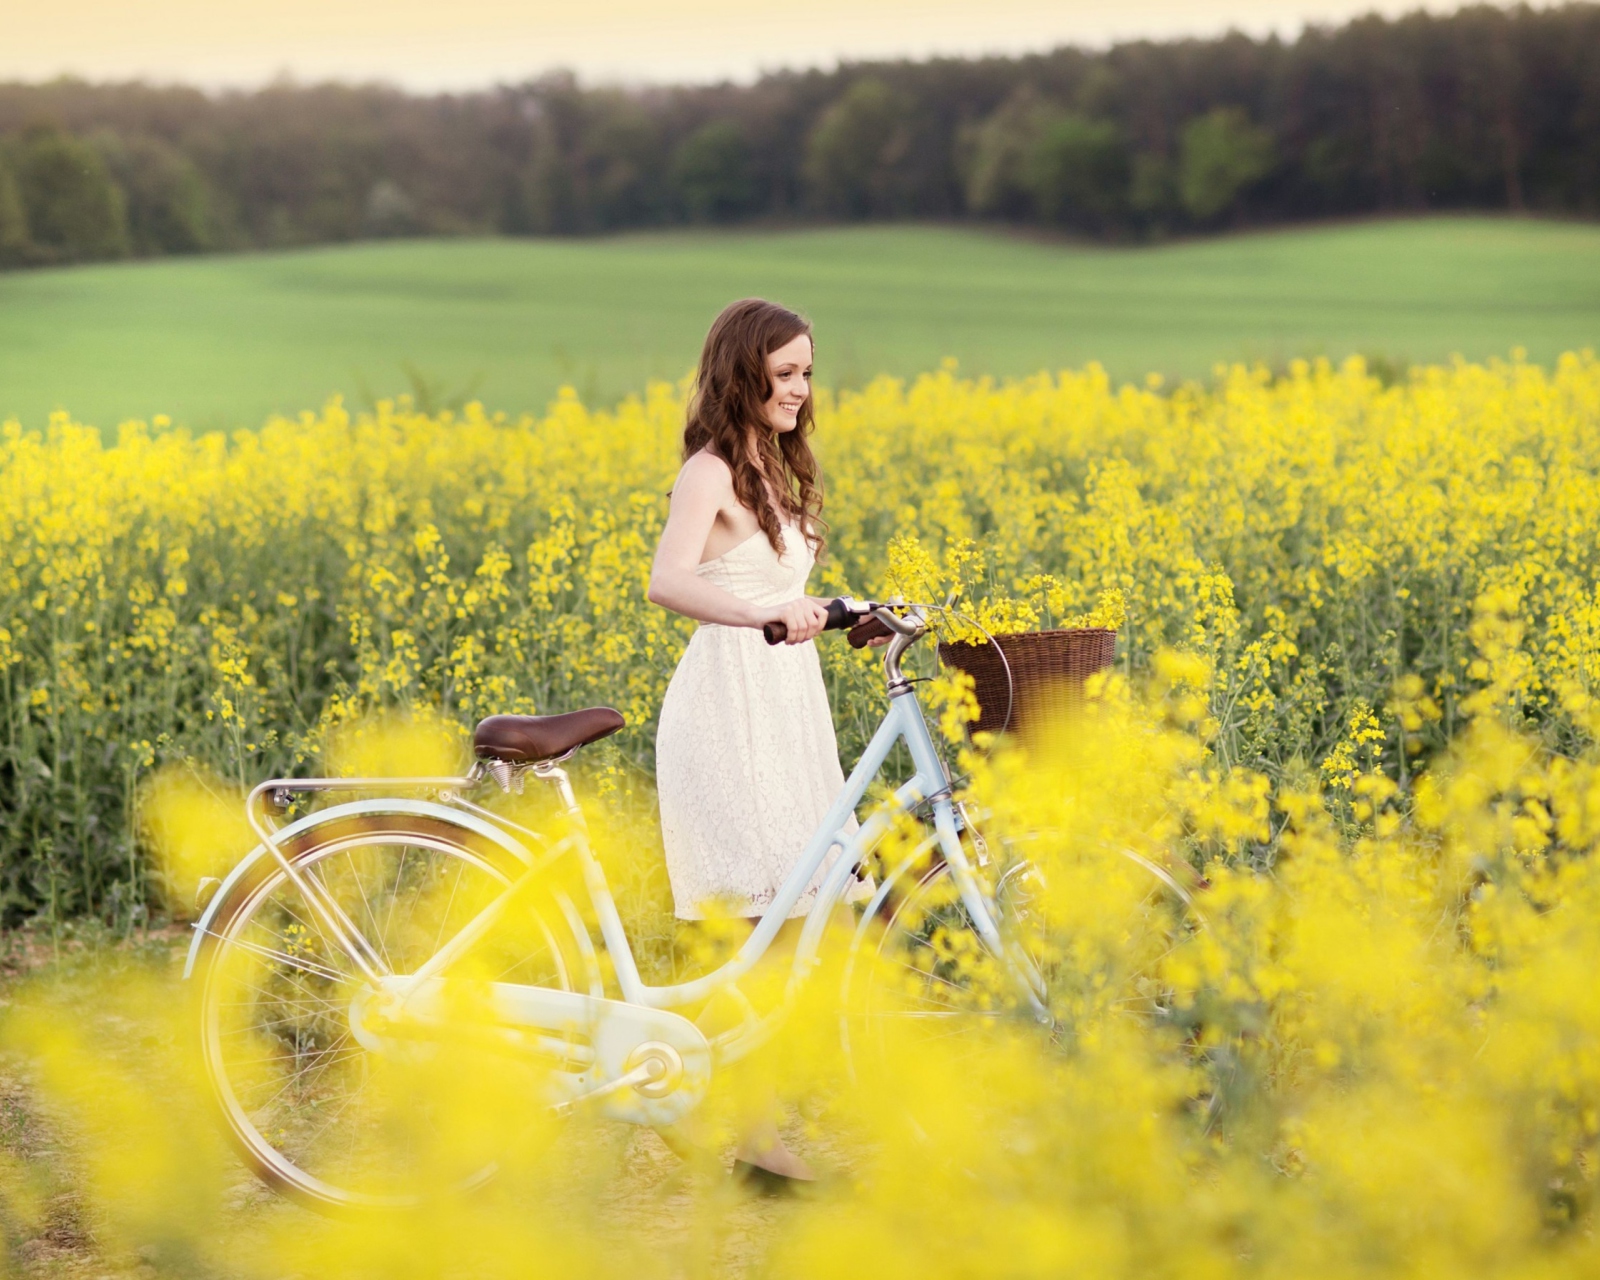 Girl With Bicycle In Yellow Field wallpaper 1600x1280